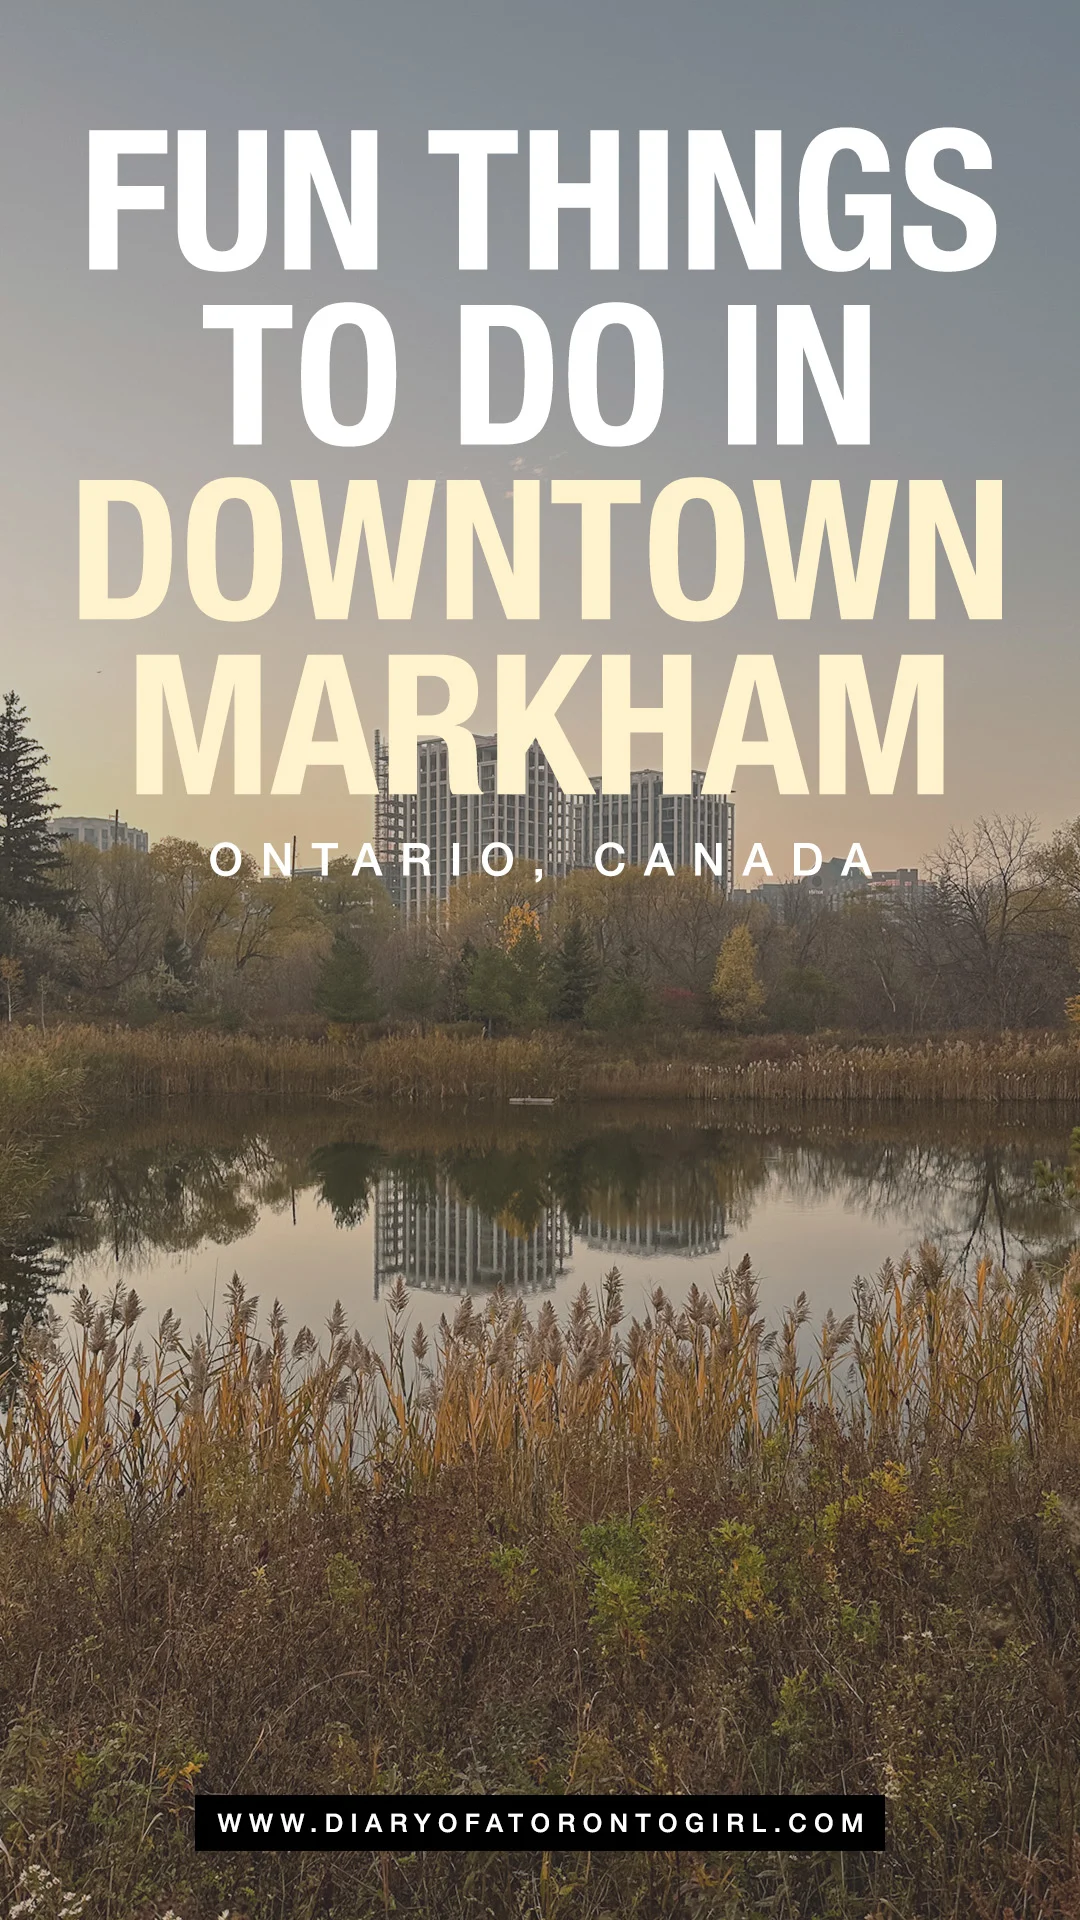 Fun things to do in Downtown Markham